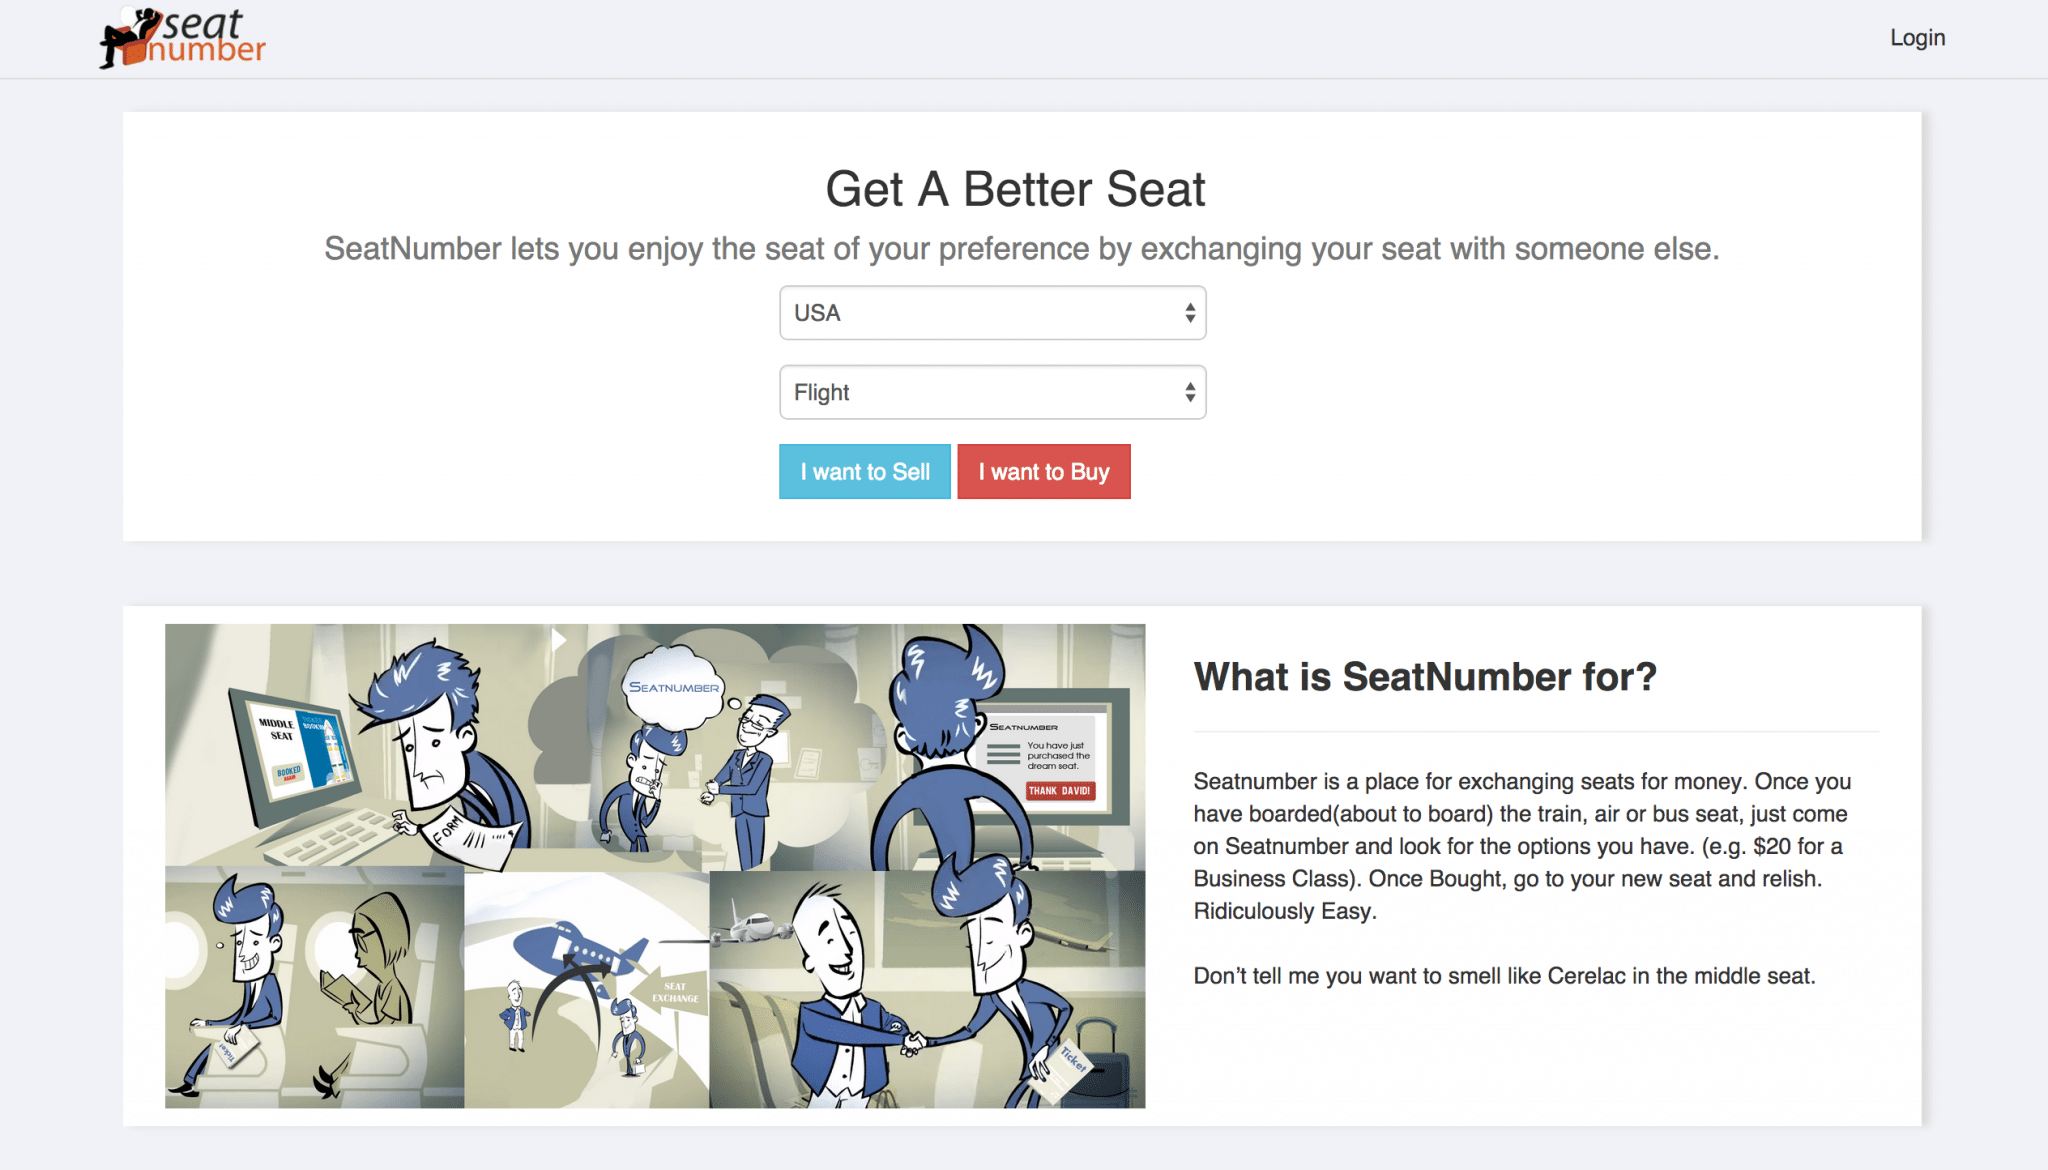 SeatNumber lets fellow travelers buy or exchange their seats on a plane, bus or train.